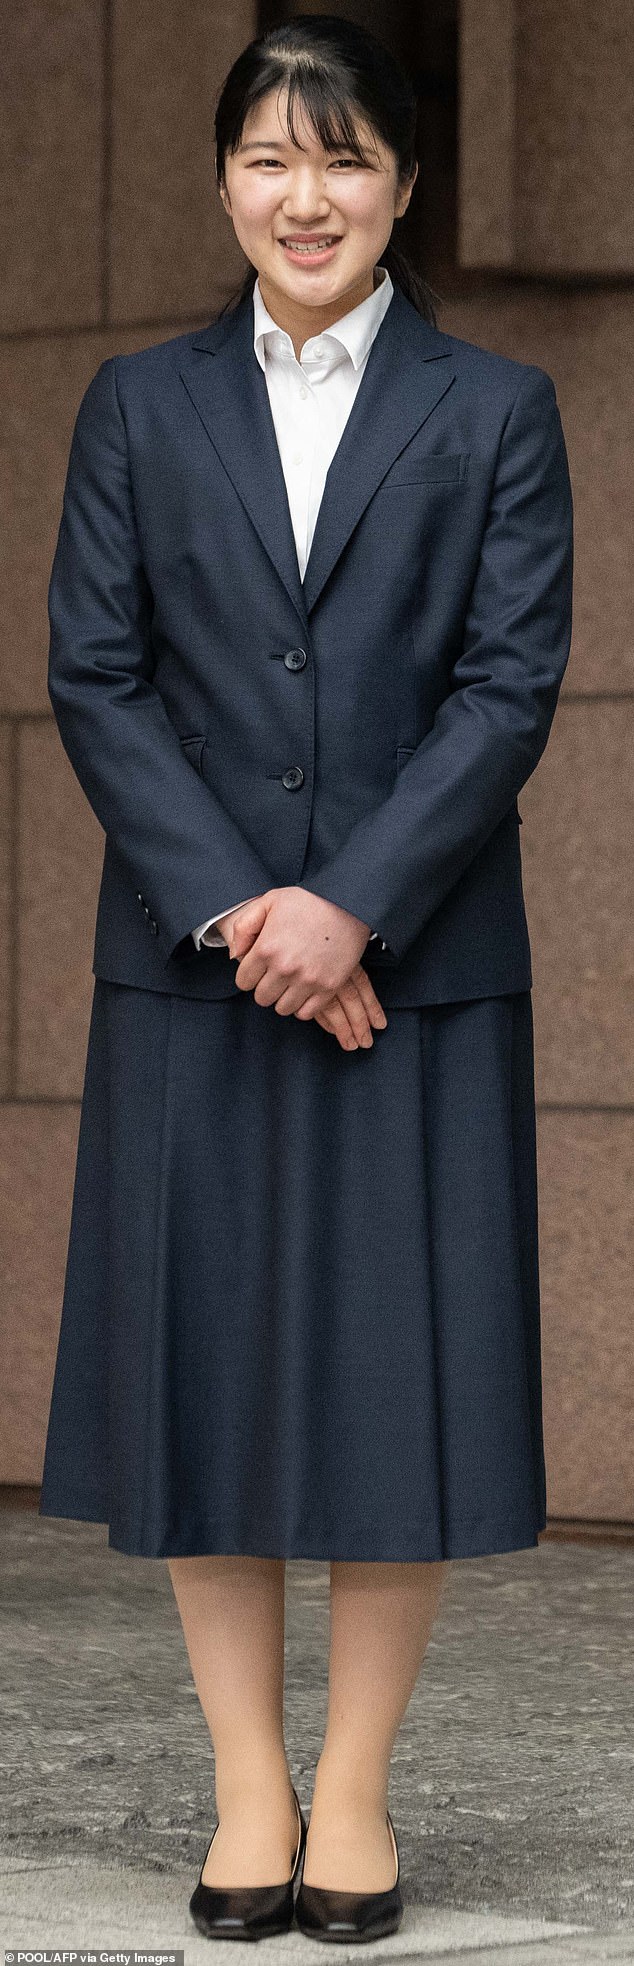 The daughter of Emperor Naruhito and Empress Masako, photographed outside the Japanese Red Cross building in Tokyo.